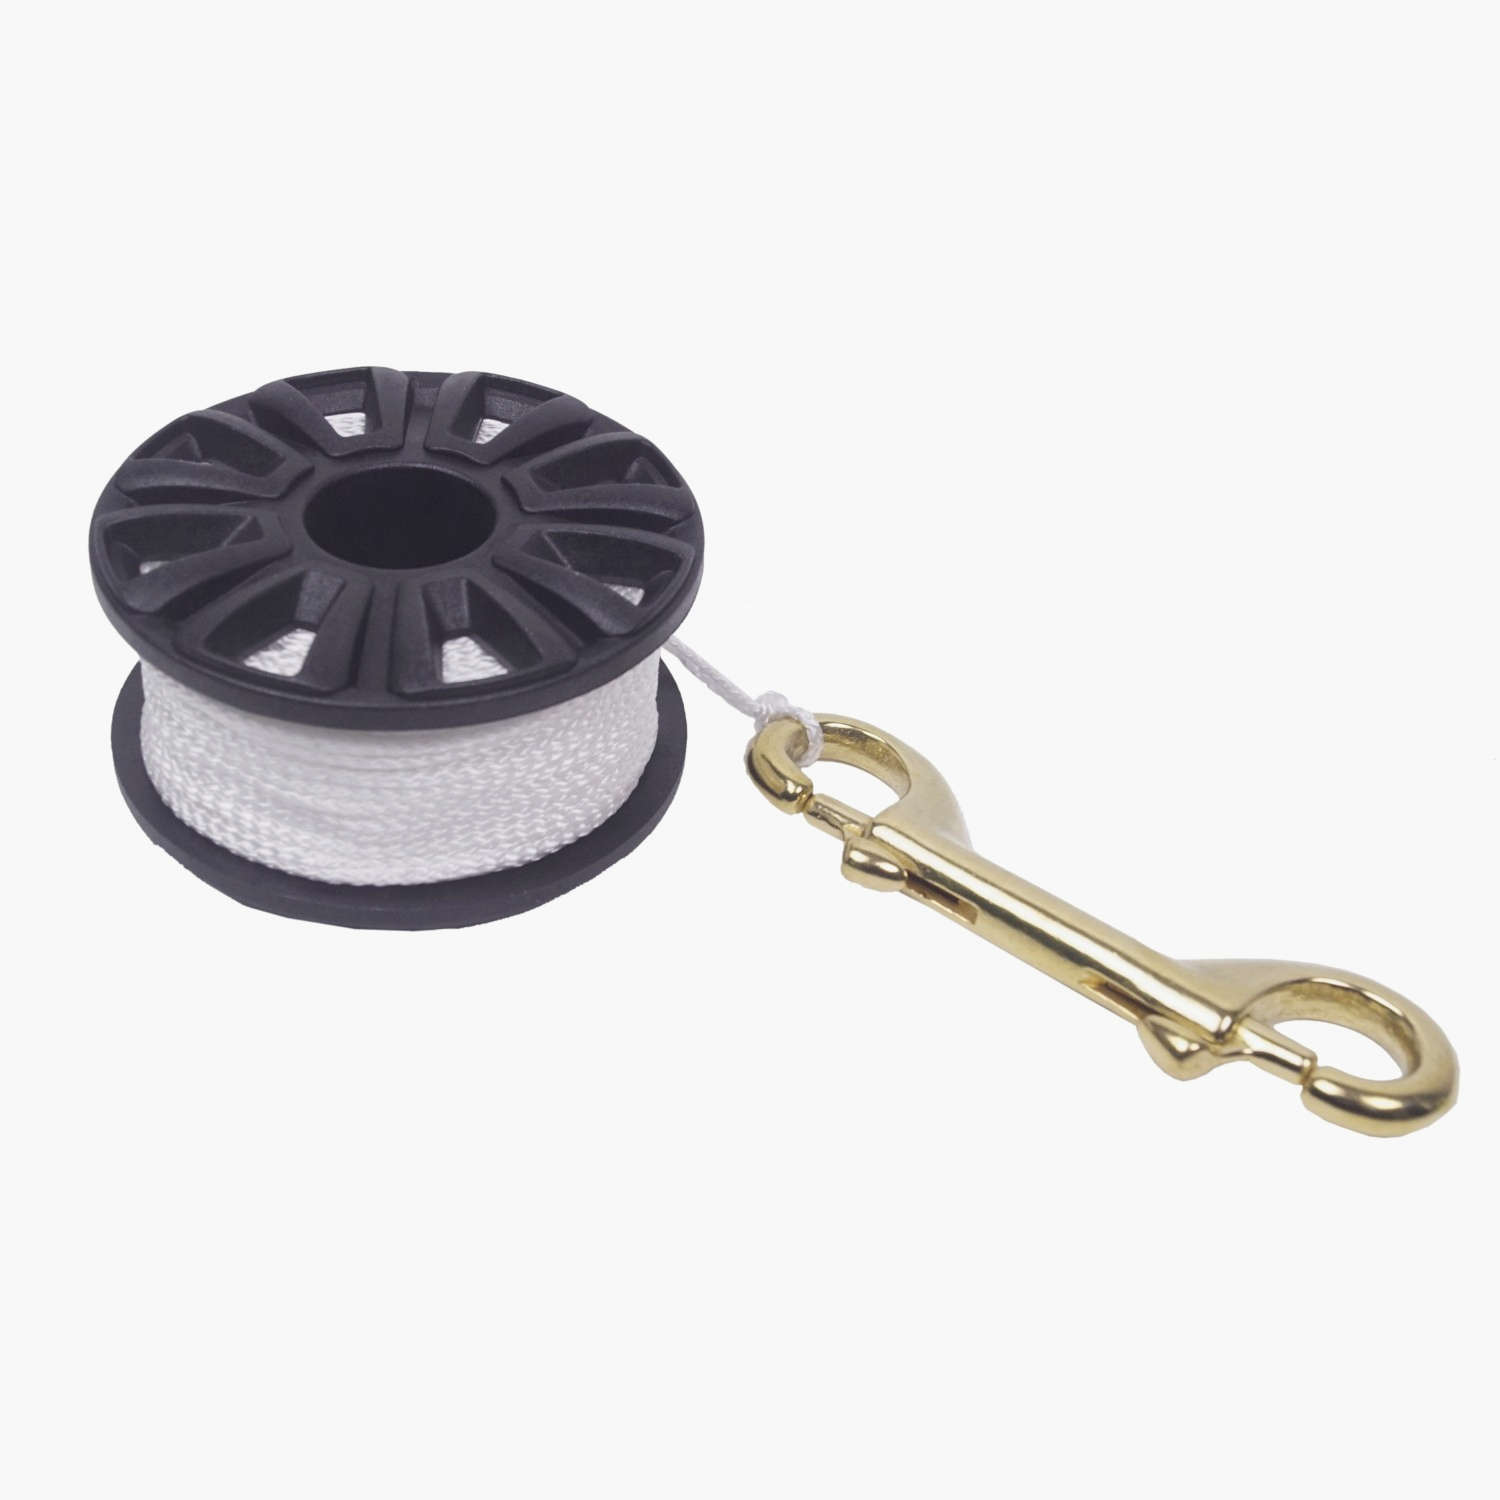 Compact Dive Finger Reel - 30m / 100'  Lomo Watersport UK. Wetsuits, Dry  Bags & Outdoor Gear.